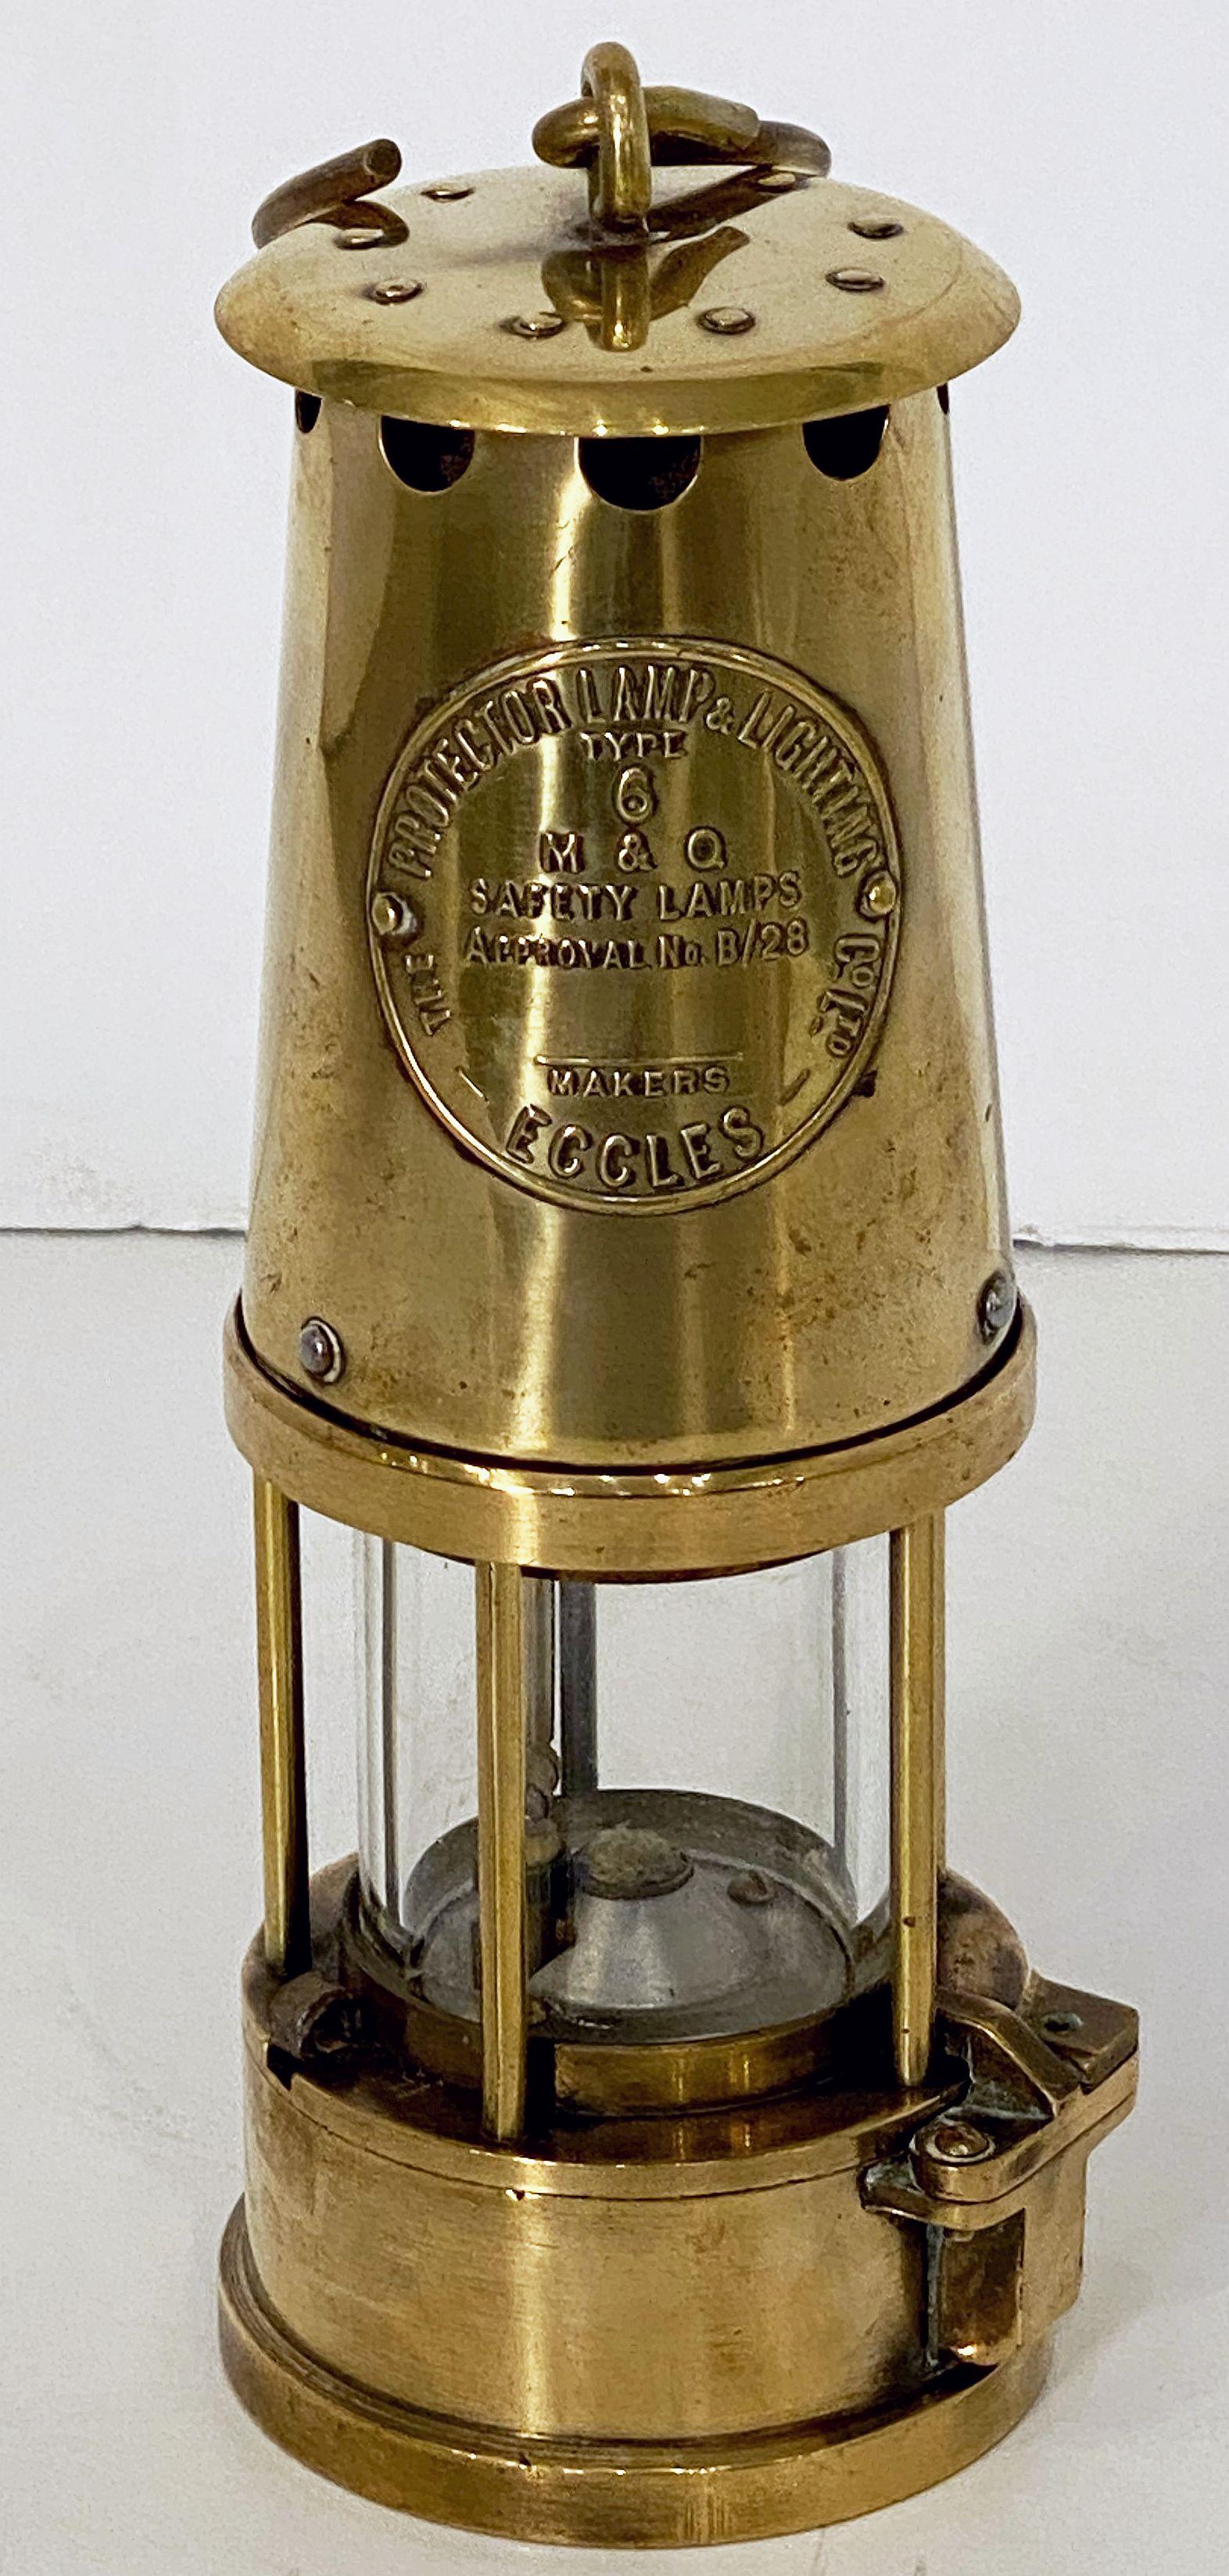 A fine vintage English miner's lamp or inspector's safety lantern of brass and steel in working order.
With maker's label - Inscription reads:

